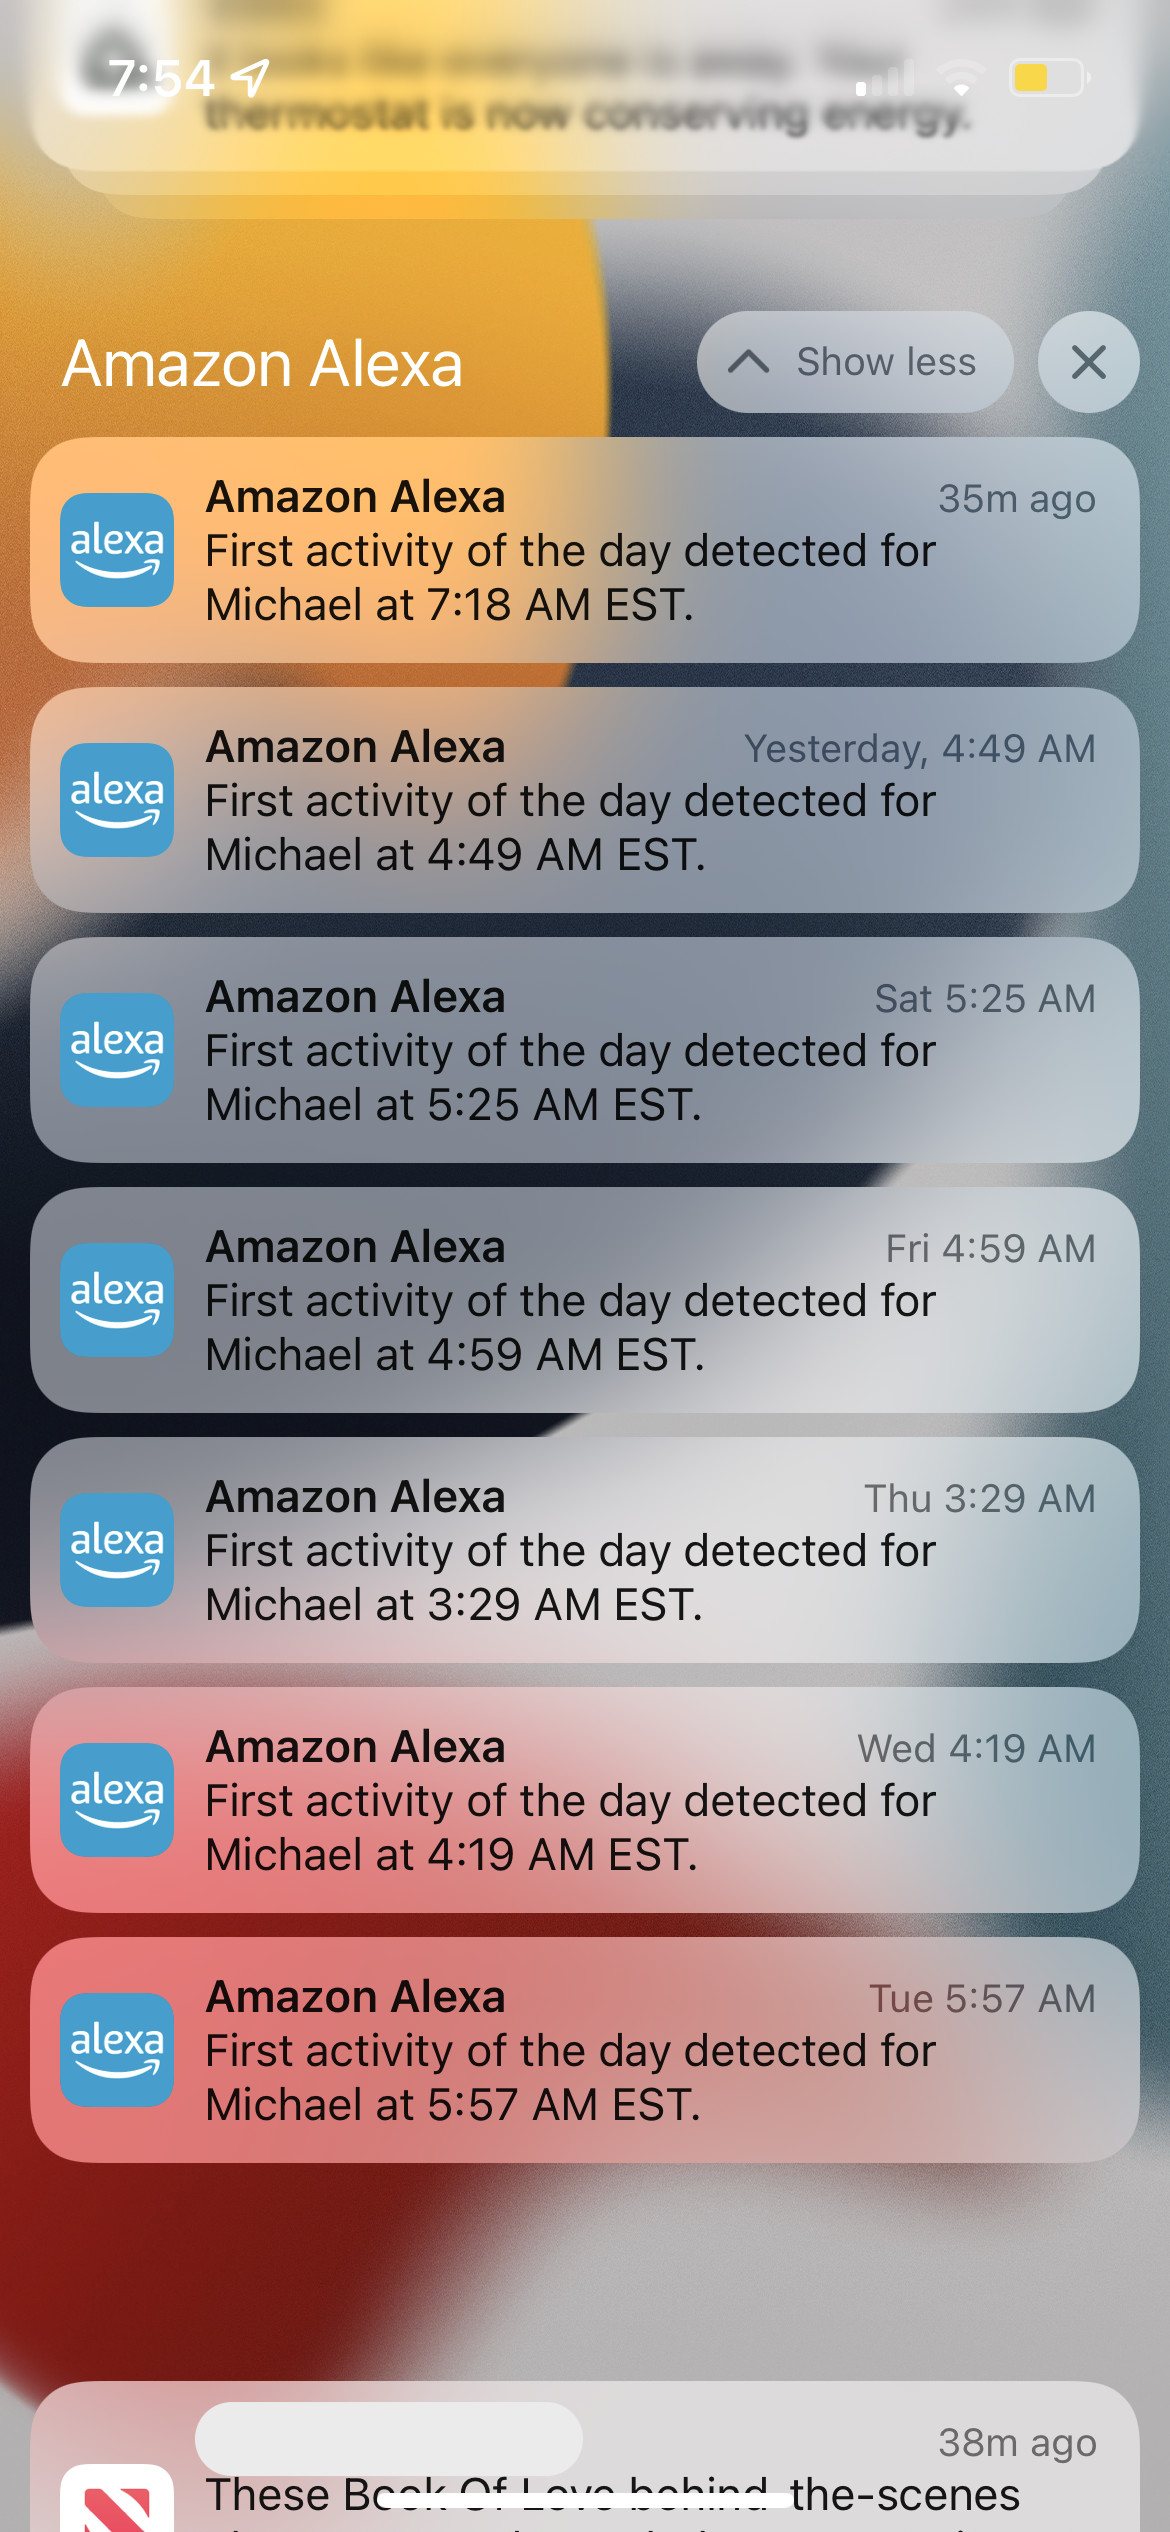 Alexa Together review: Amazon’s elder care service helped me stay connected to my parents from 300 miles away IMG 1974 1